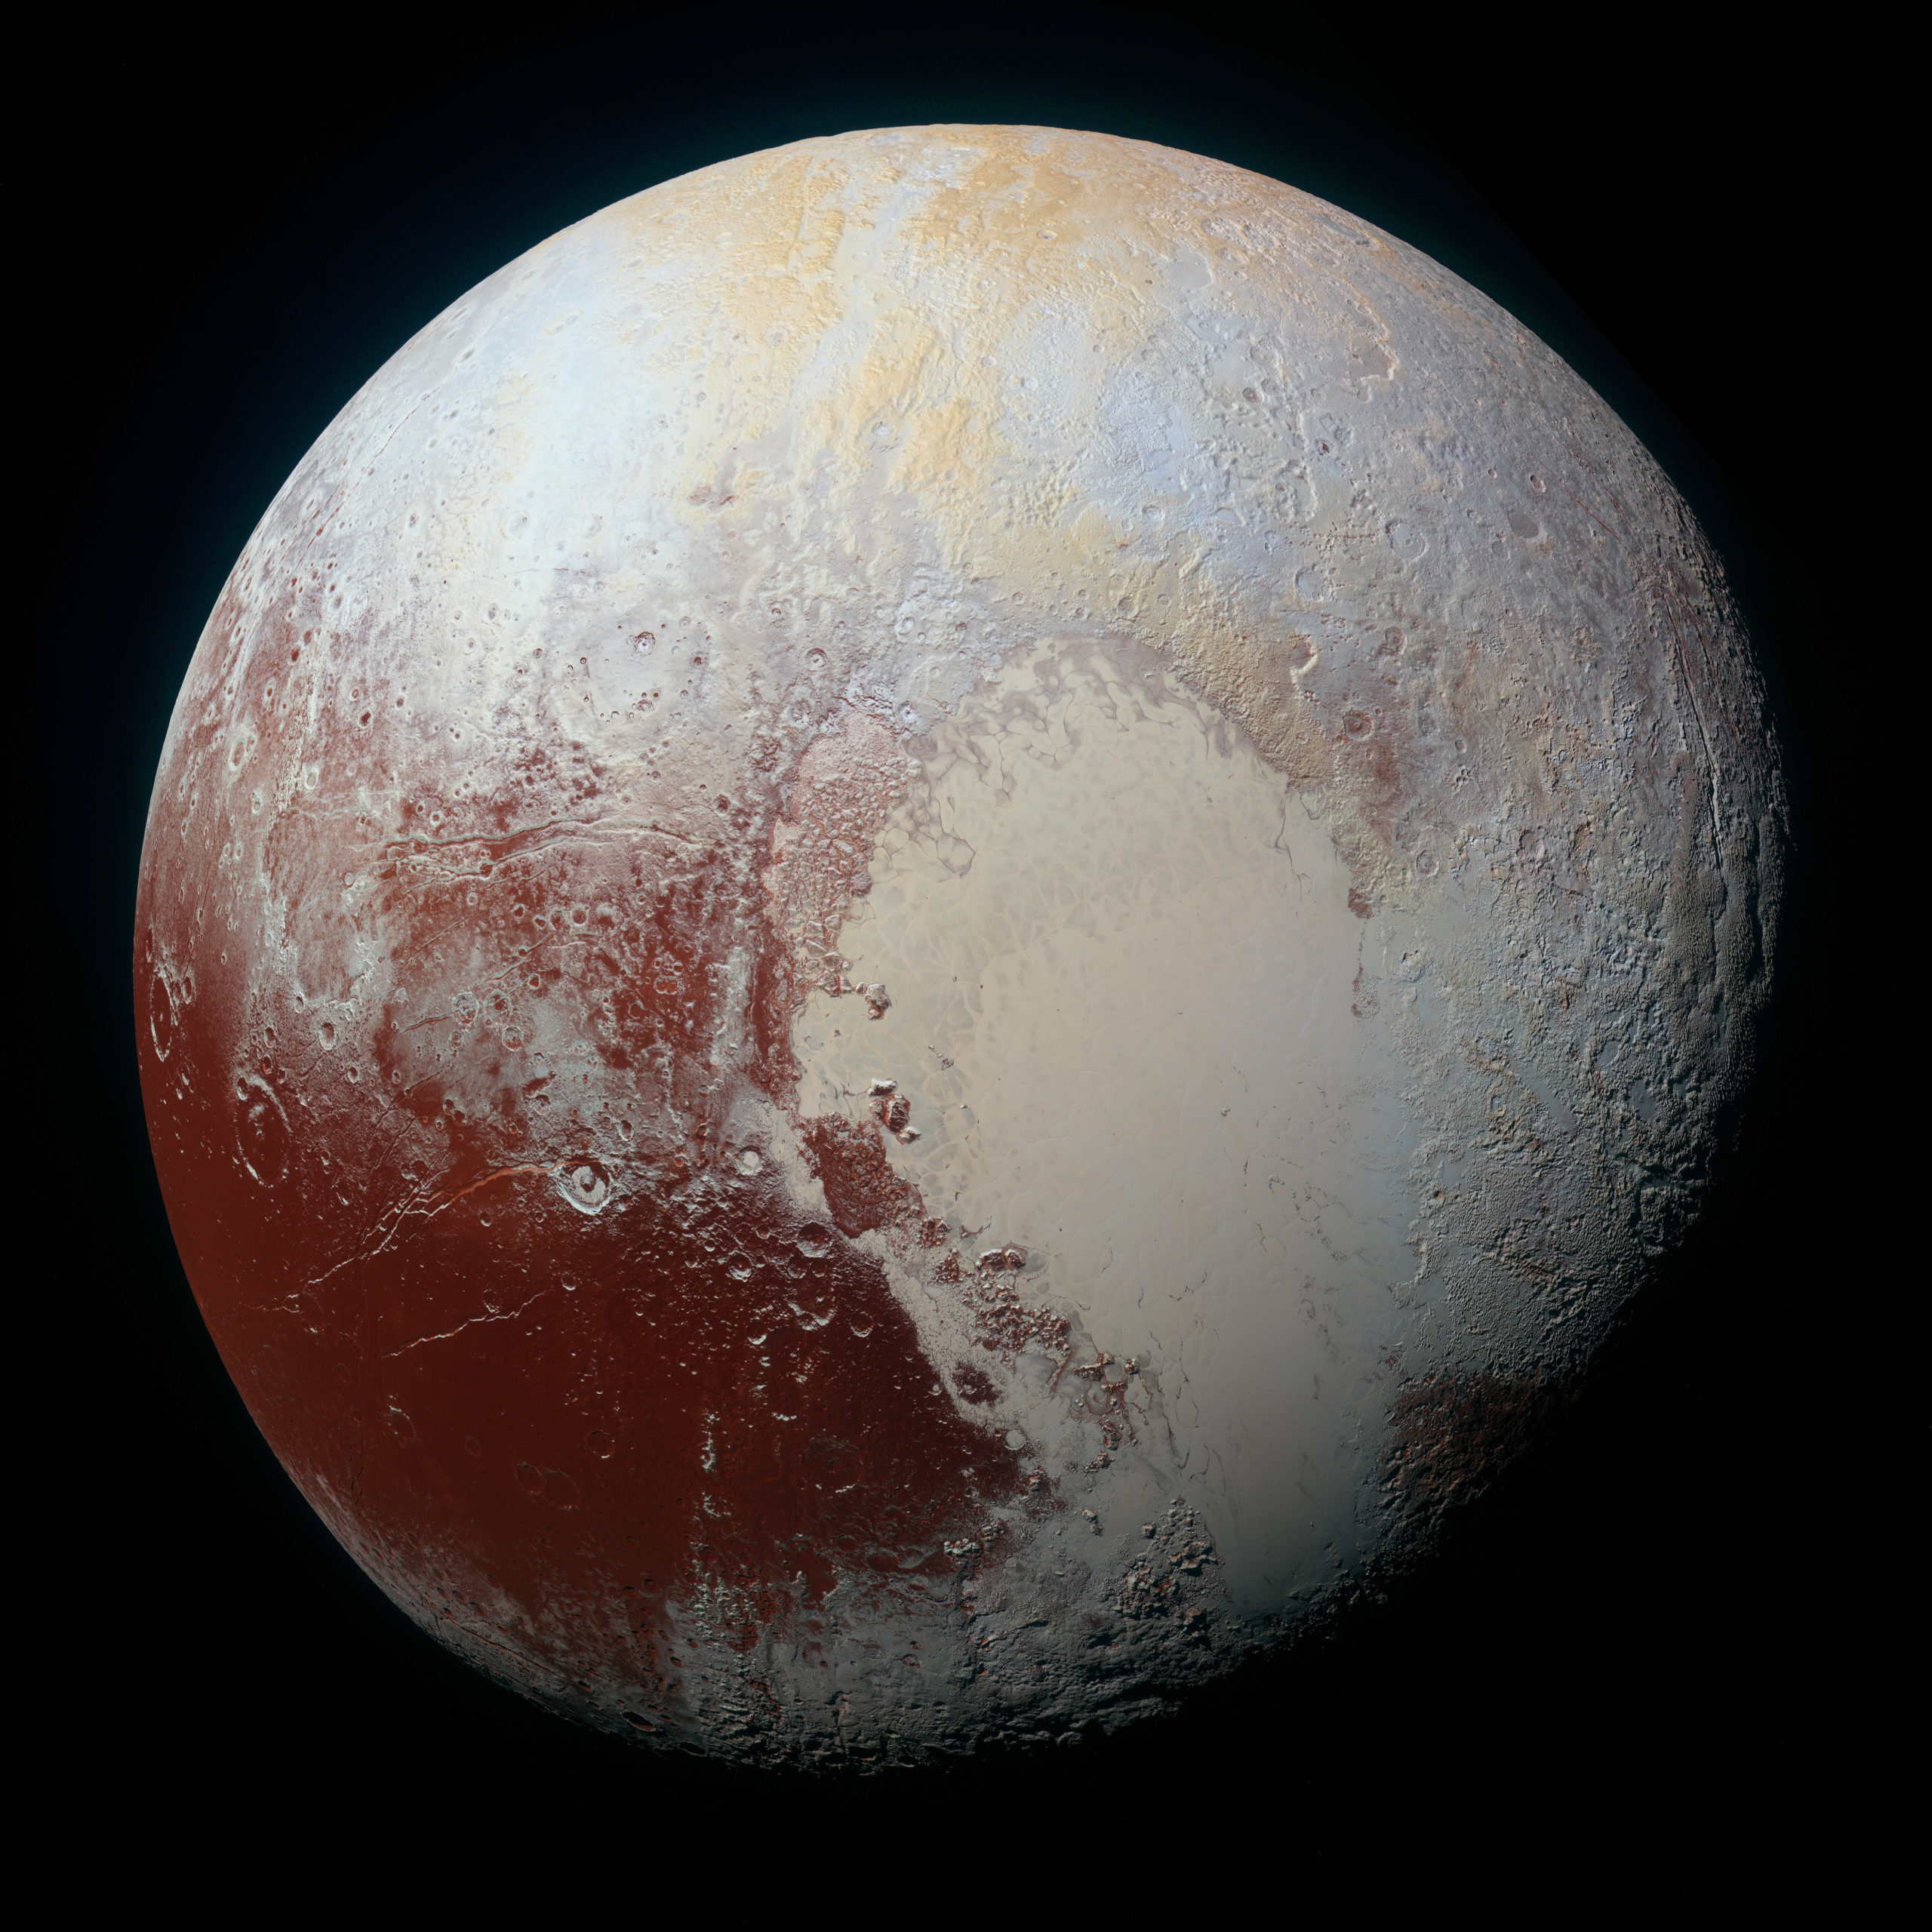 You Can See The Colour Of The Sky In The Newest Pluto Pictures — And It’s Blue